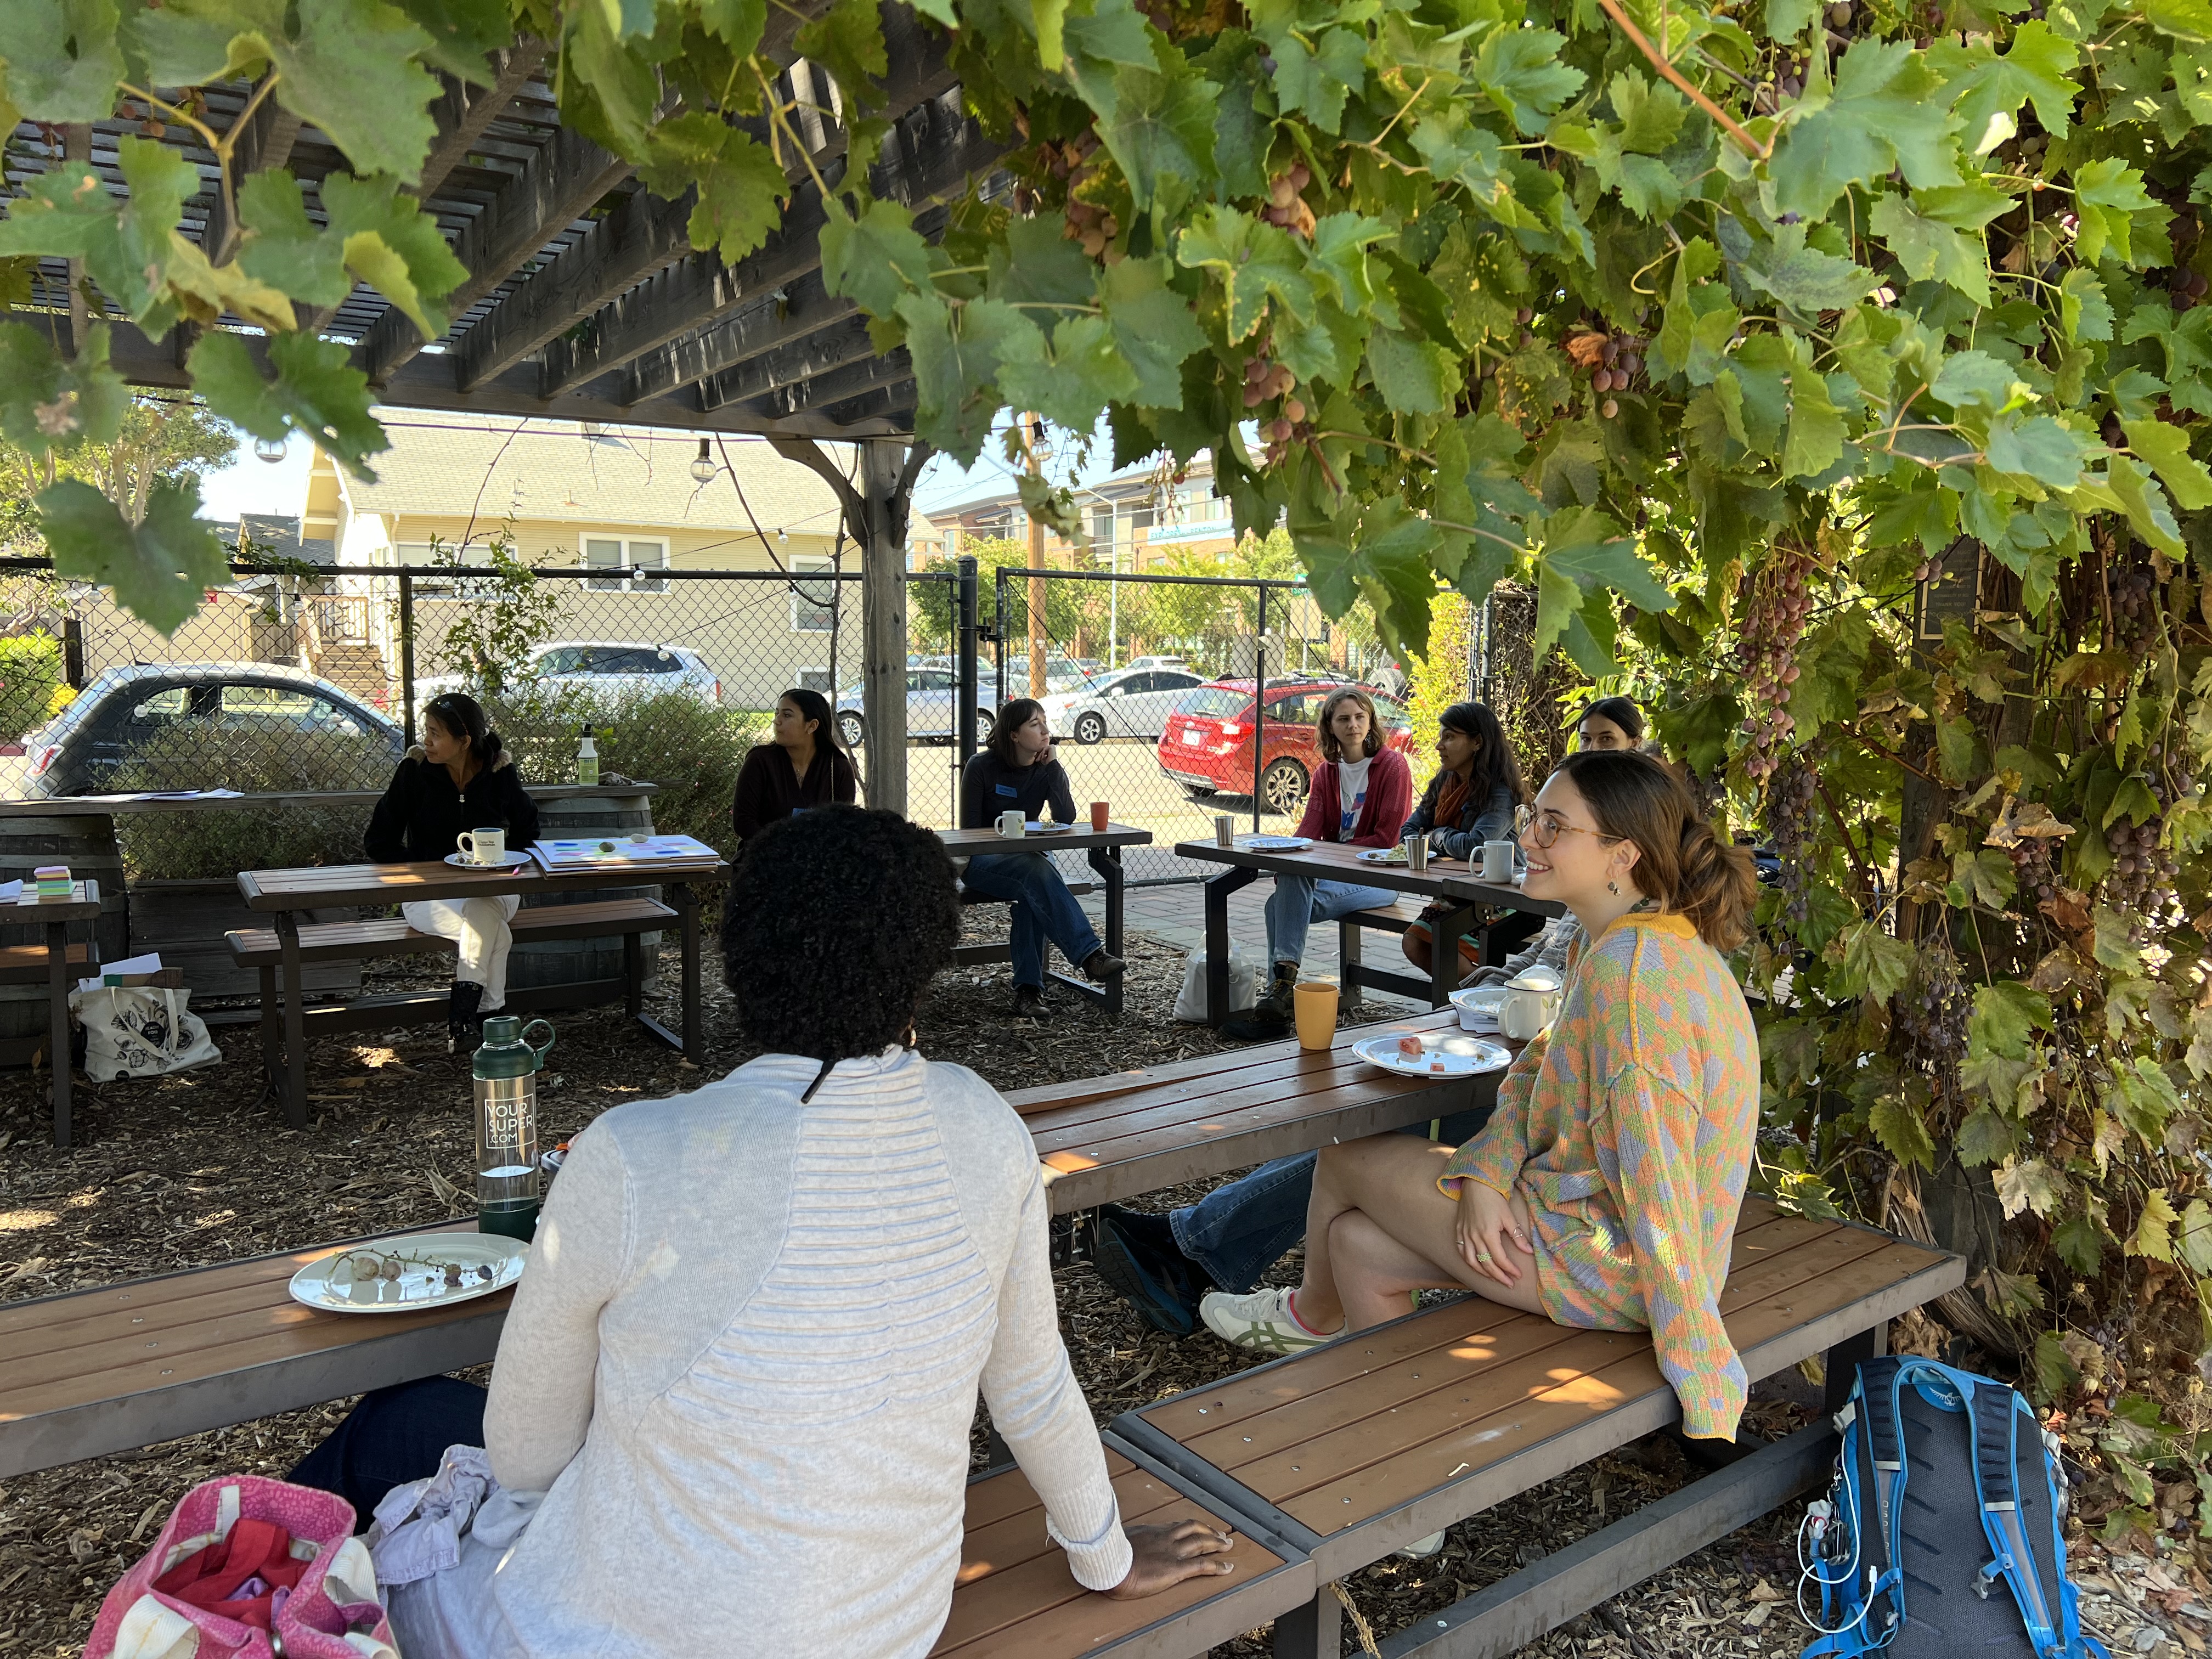 South Bay Food Justice Collaborative members gathered in Forge Garden